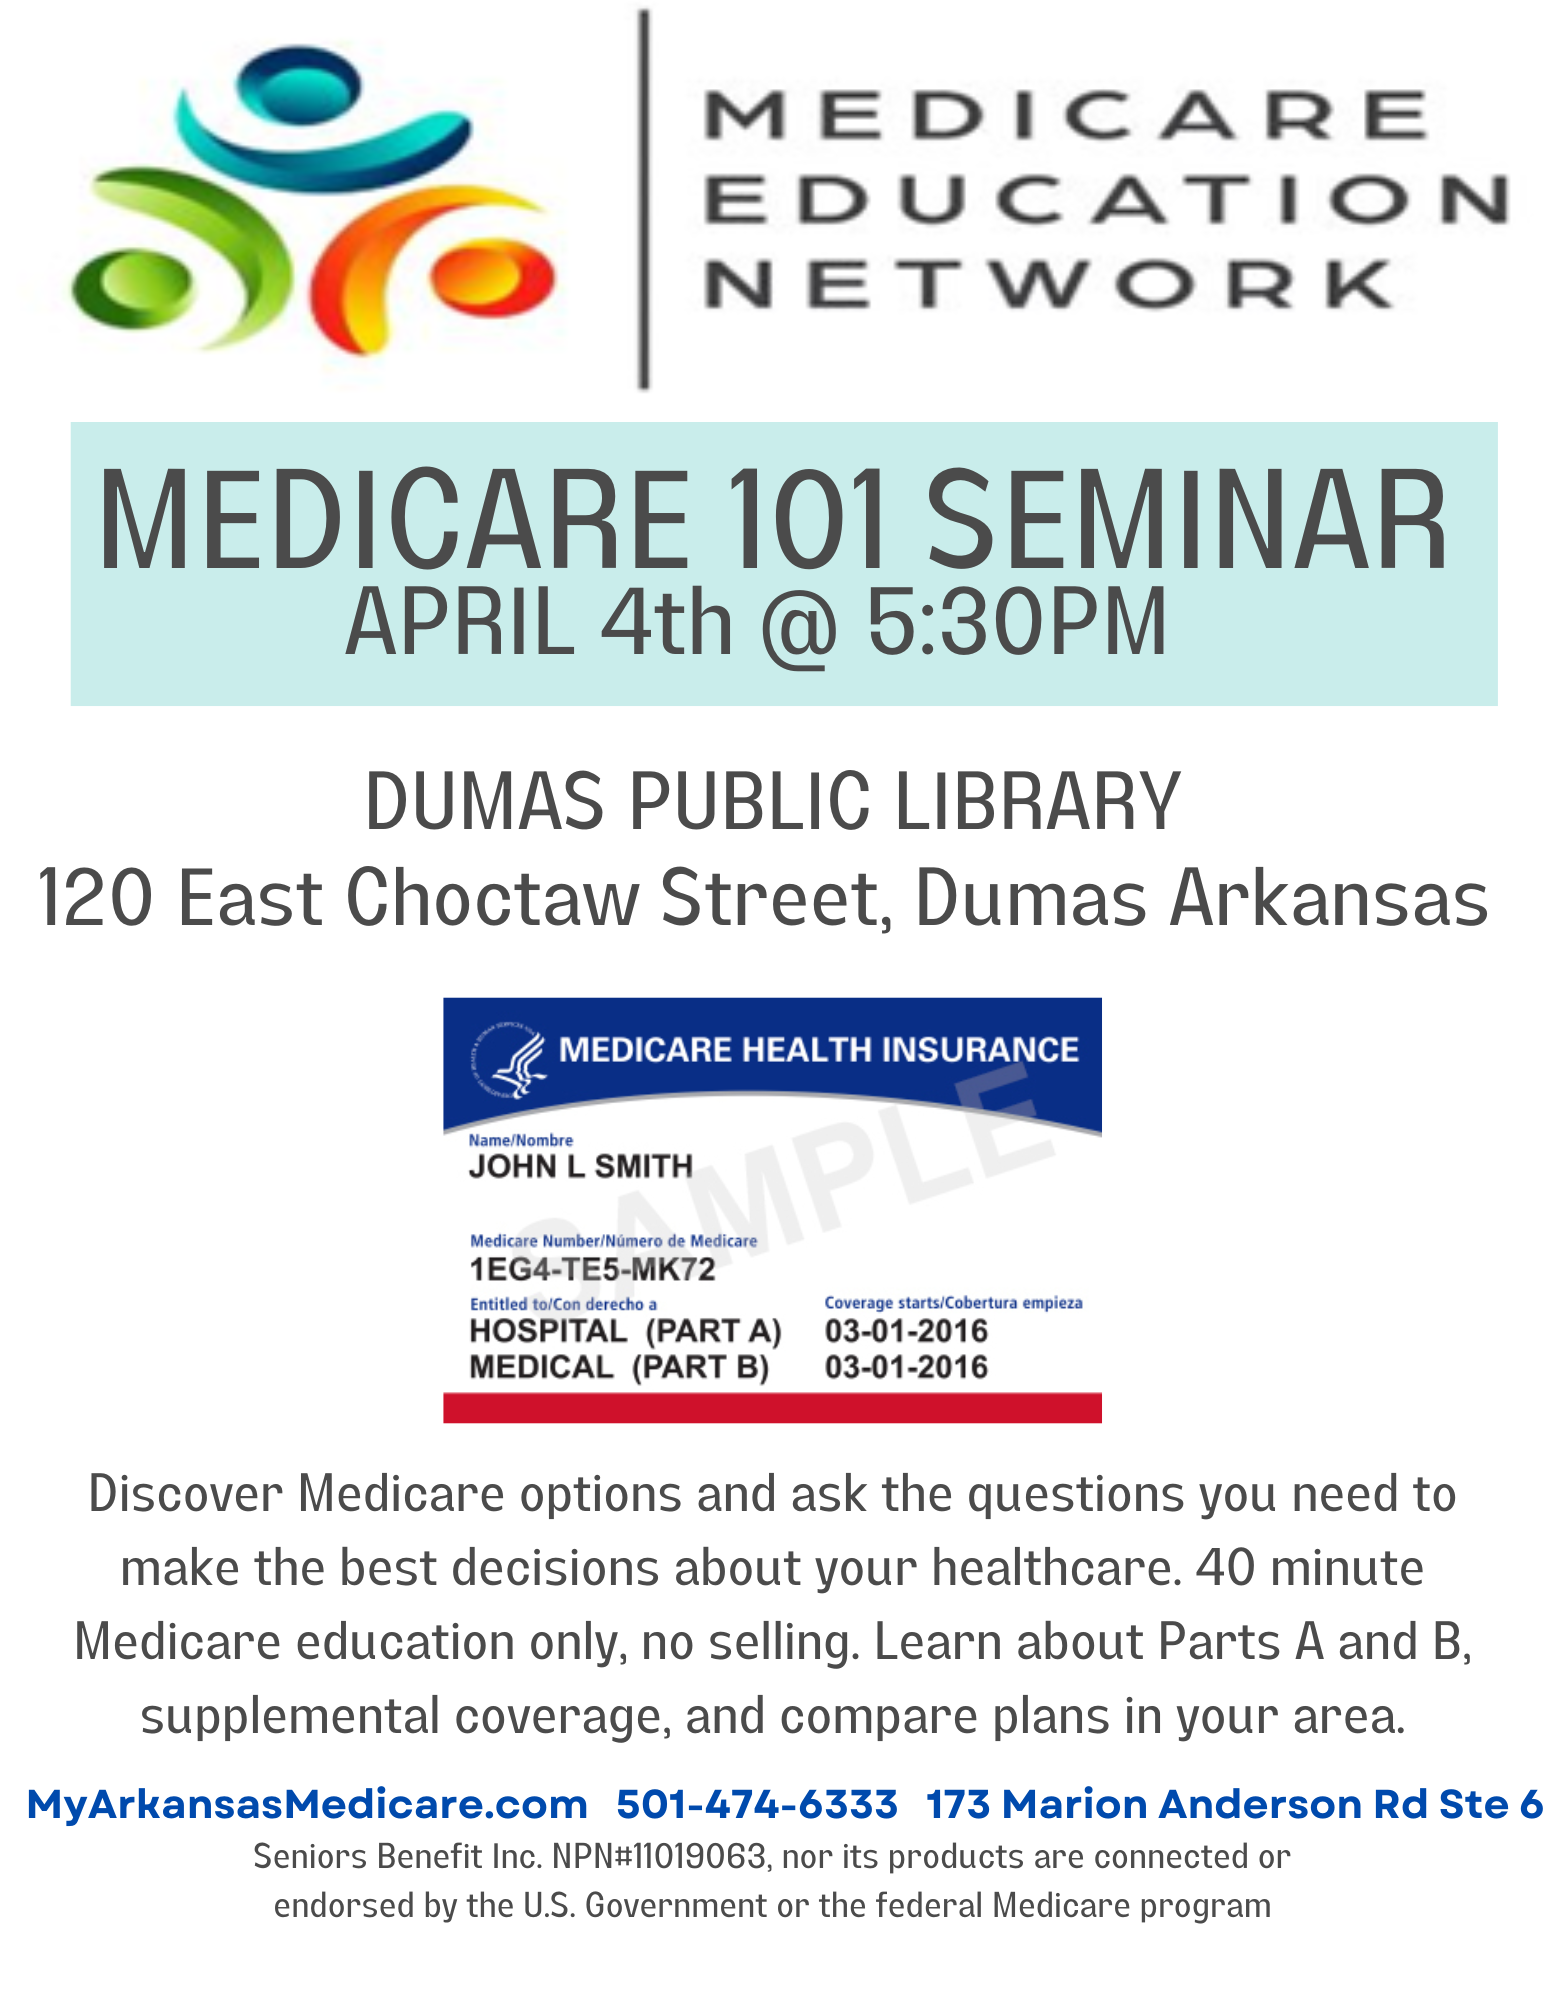 Medicare 101 Seminar on April 4th at 5:30 PM at the Dumas Library and hosted by Medicare Education Network